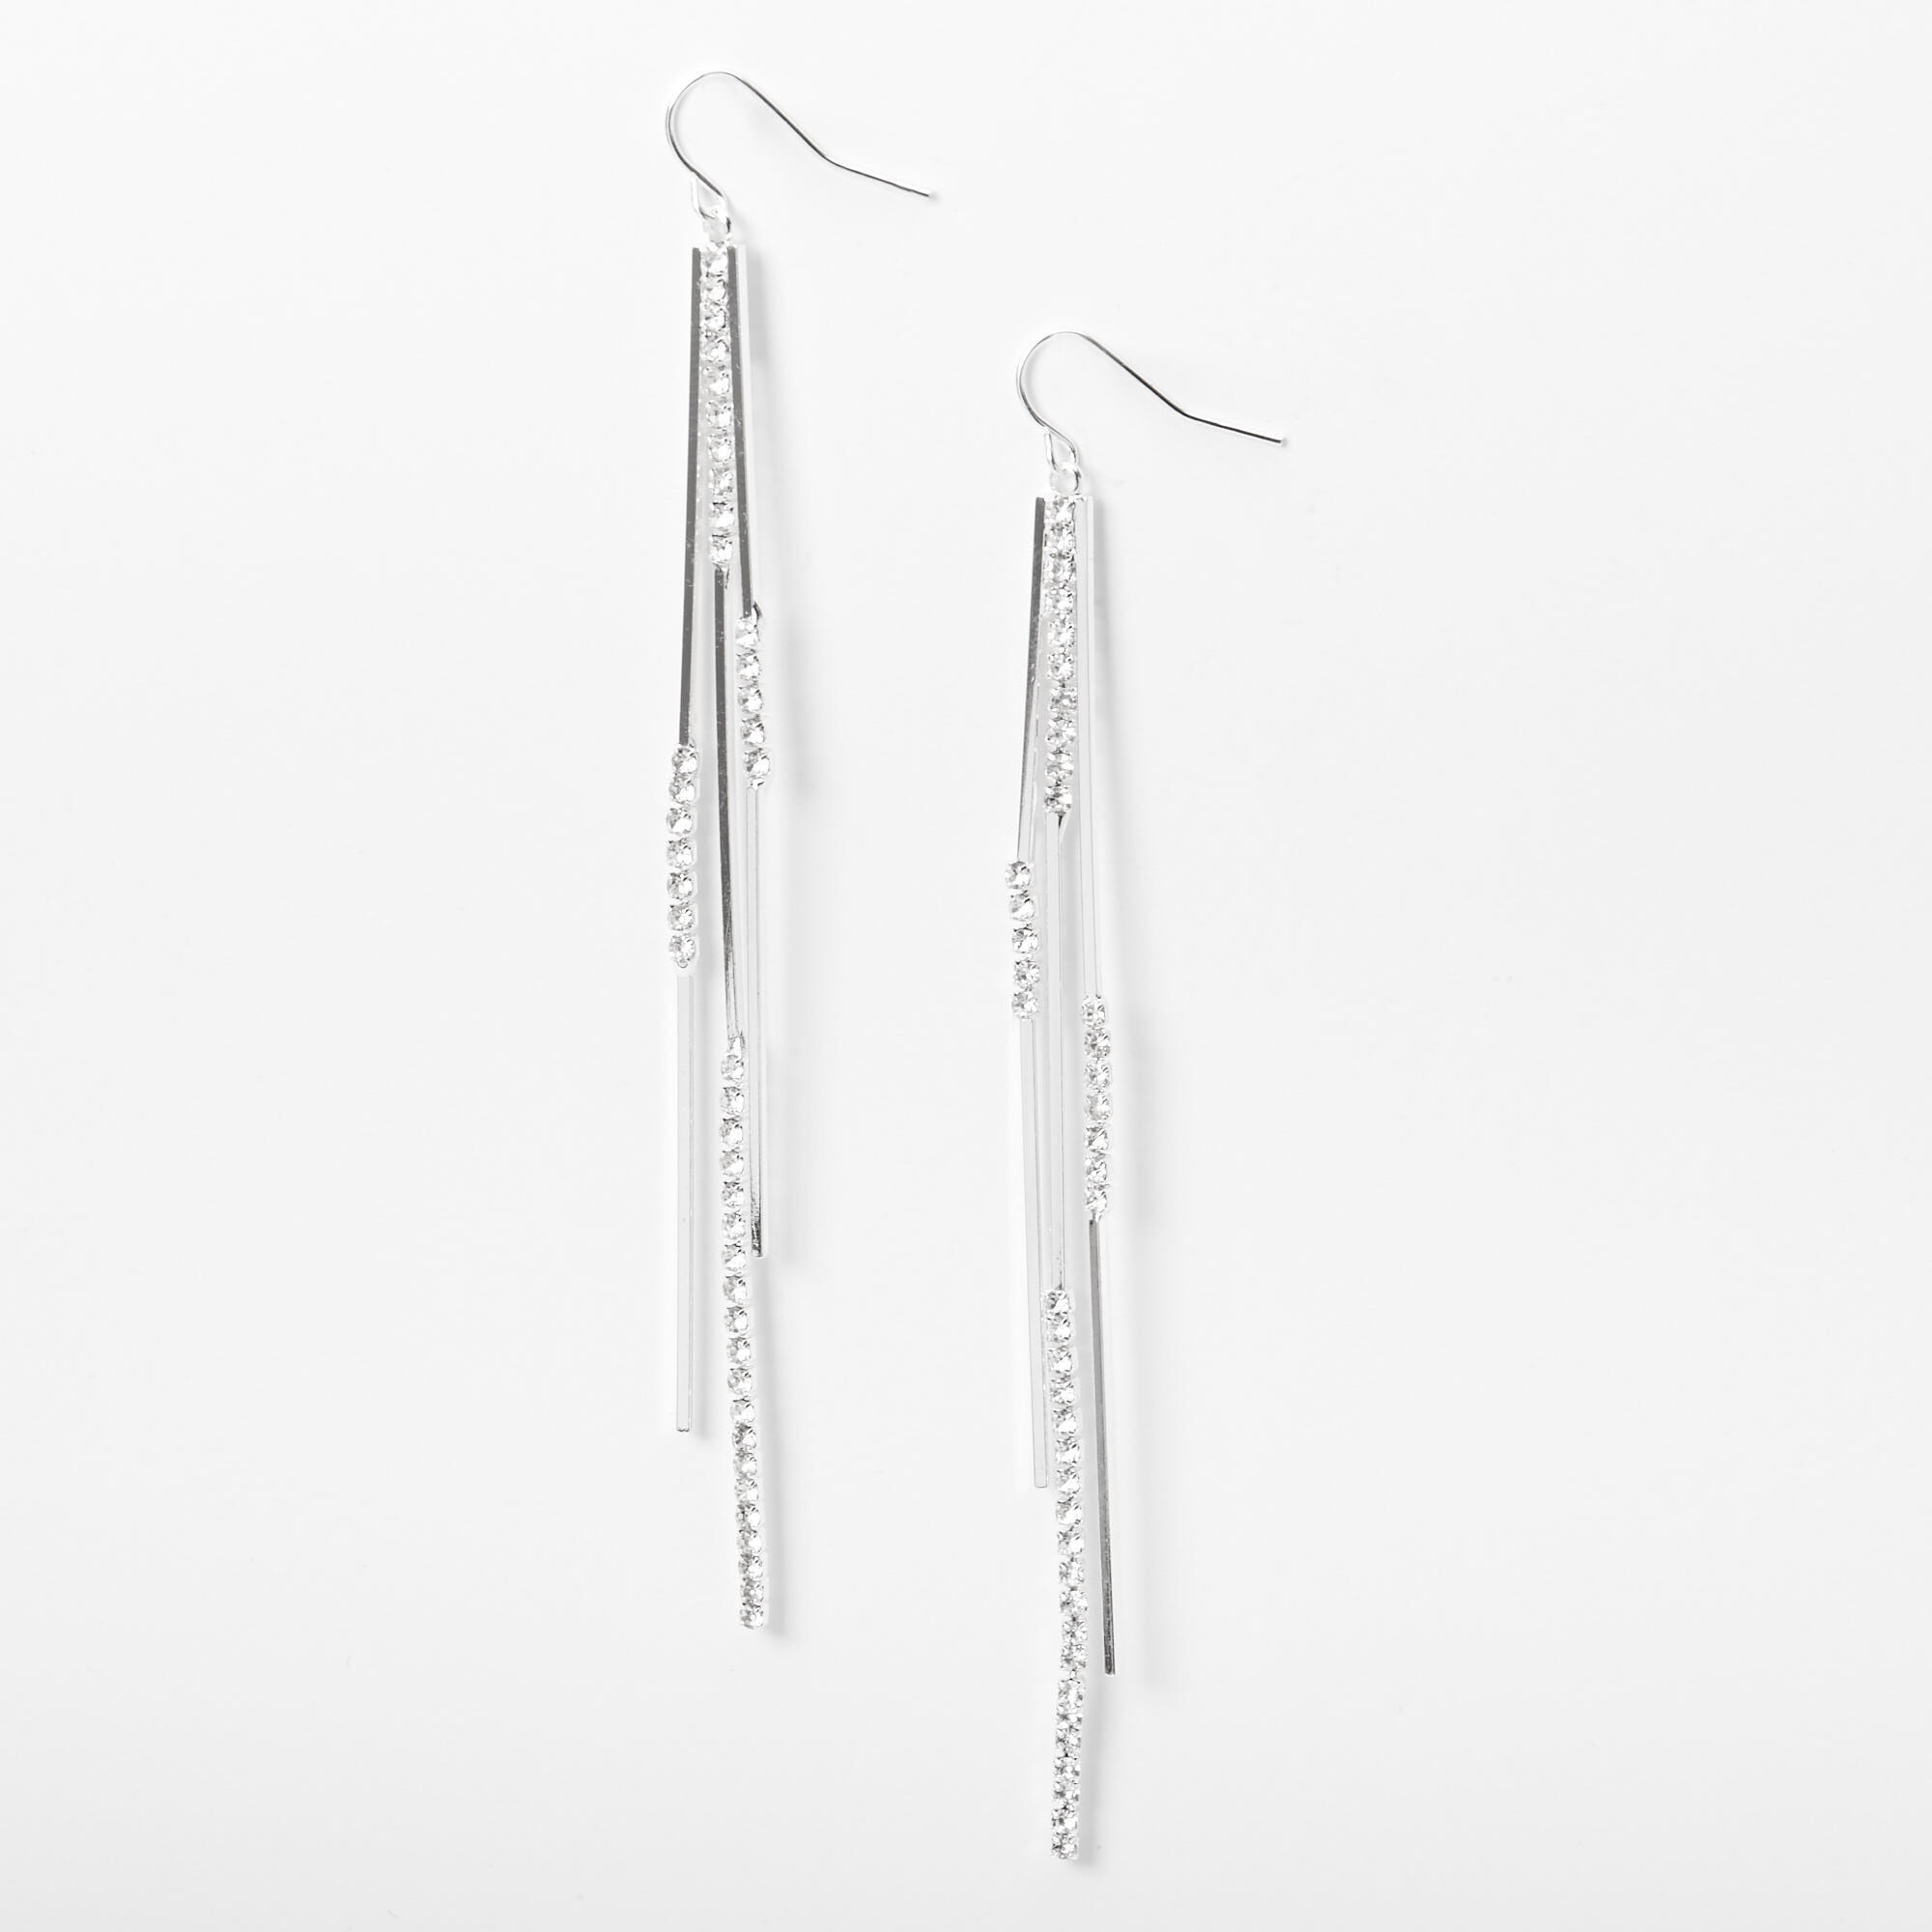 View Claires Tone Rhinestone 4 Linear Sticks Drop Earrings Silver information